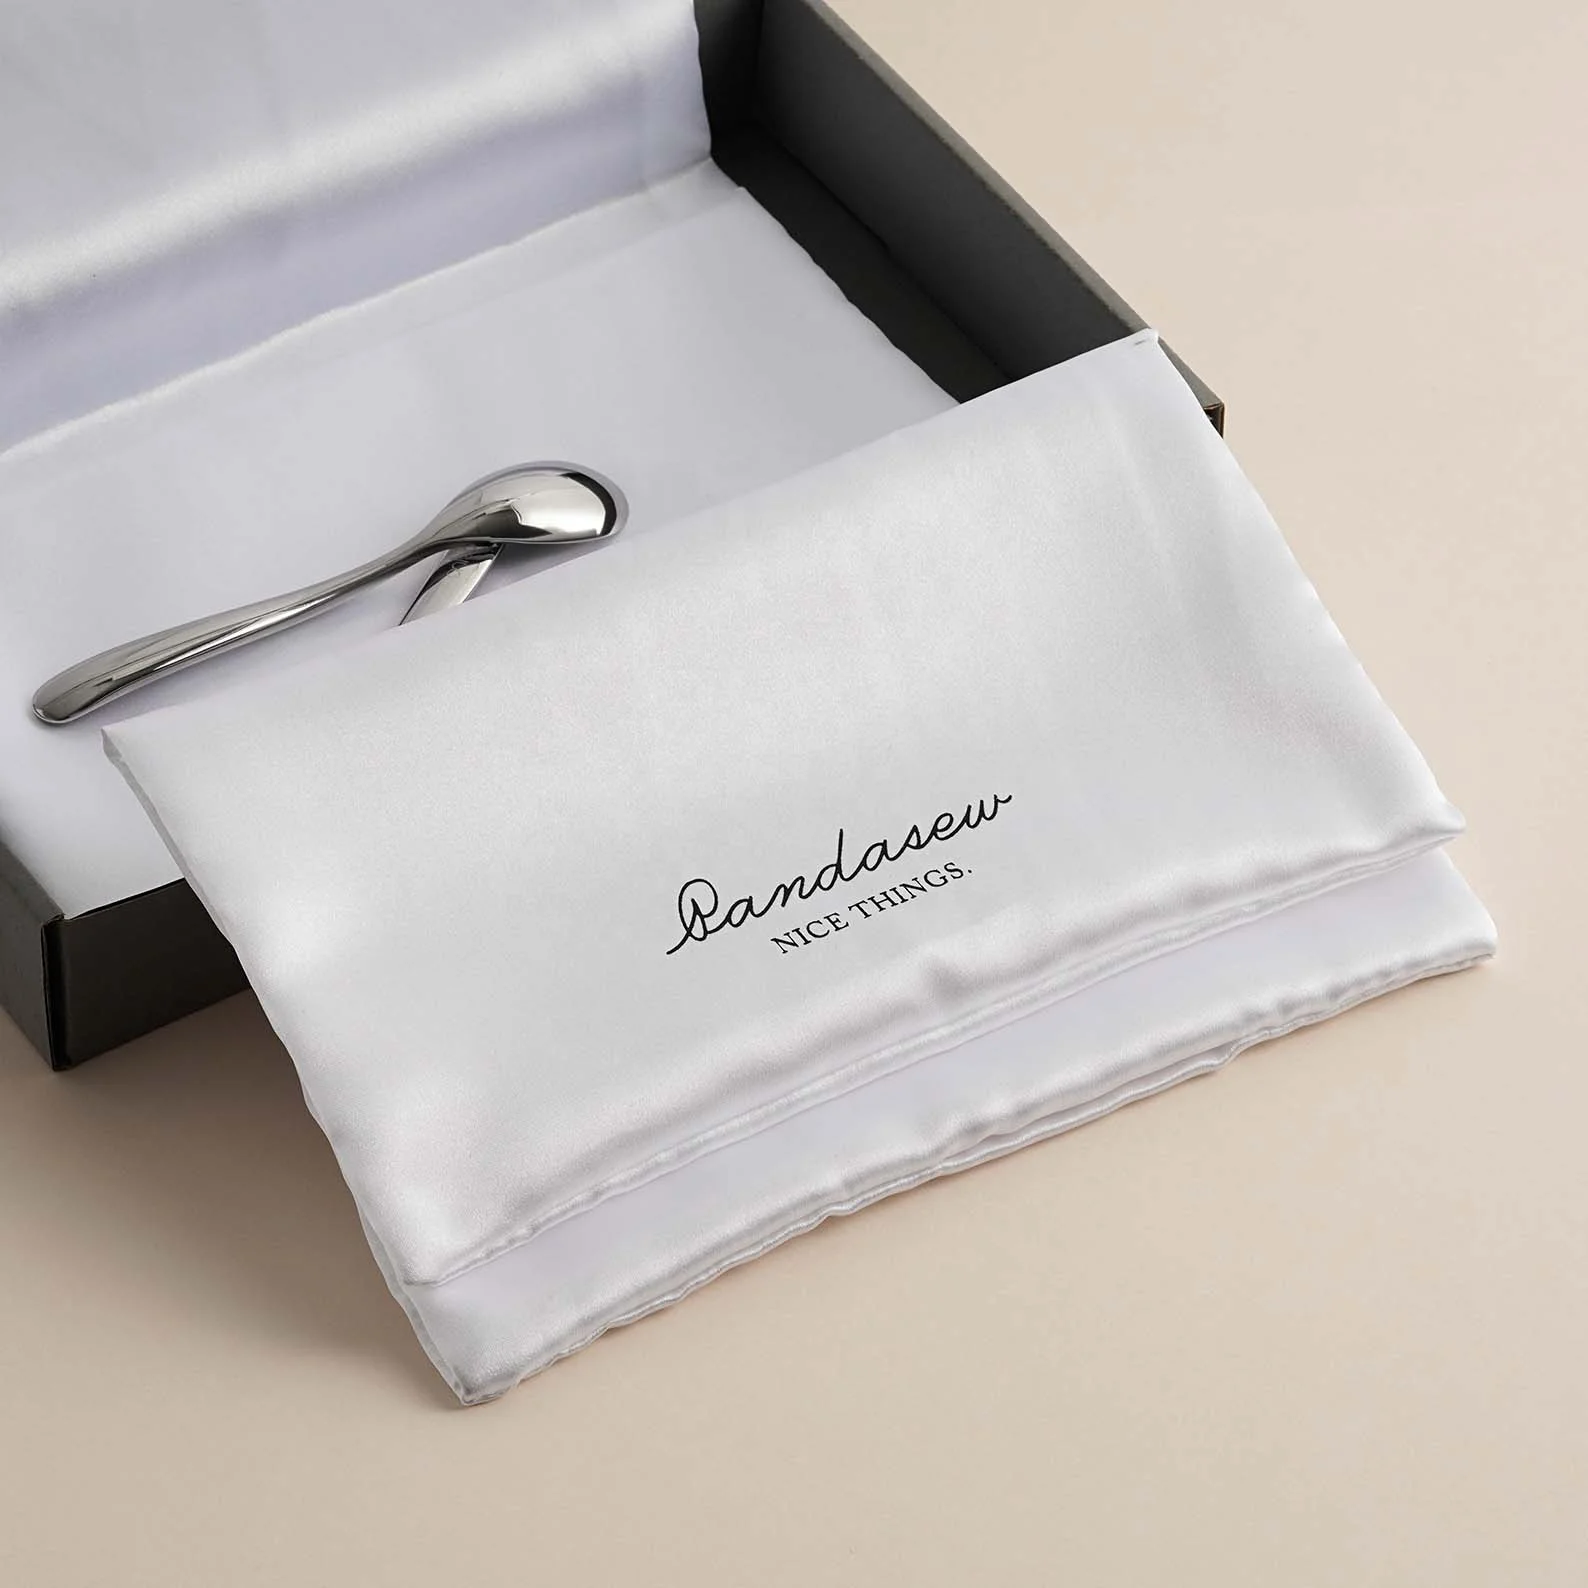 

PandaSew Custom Logo Luxury Jewelry Packaging Bag White Satin Envelope Style Jewelry Pouch, Accept customized color